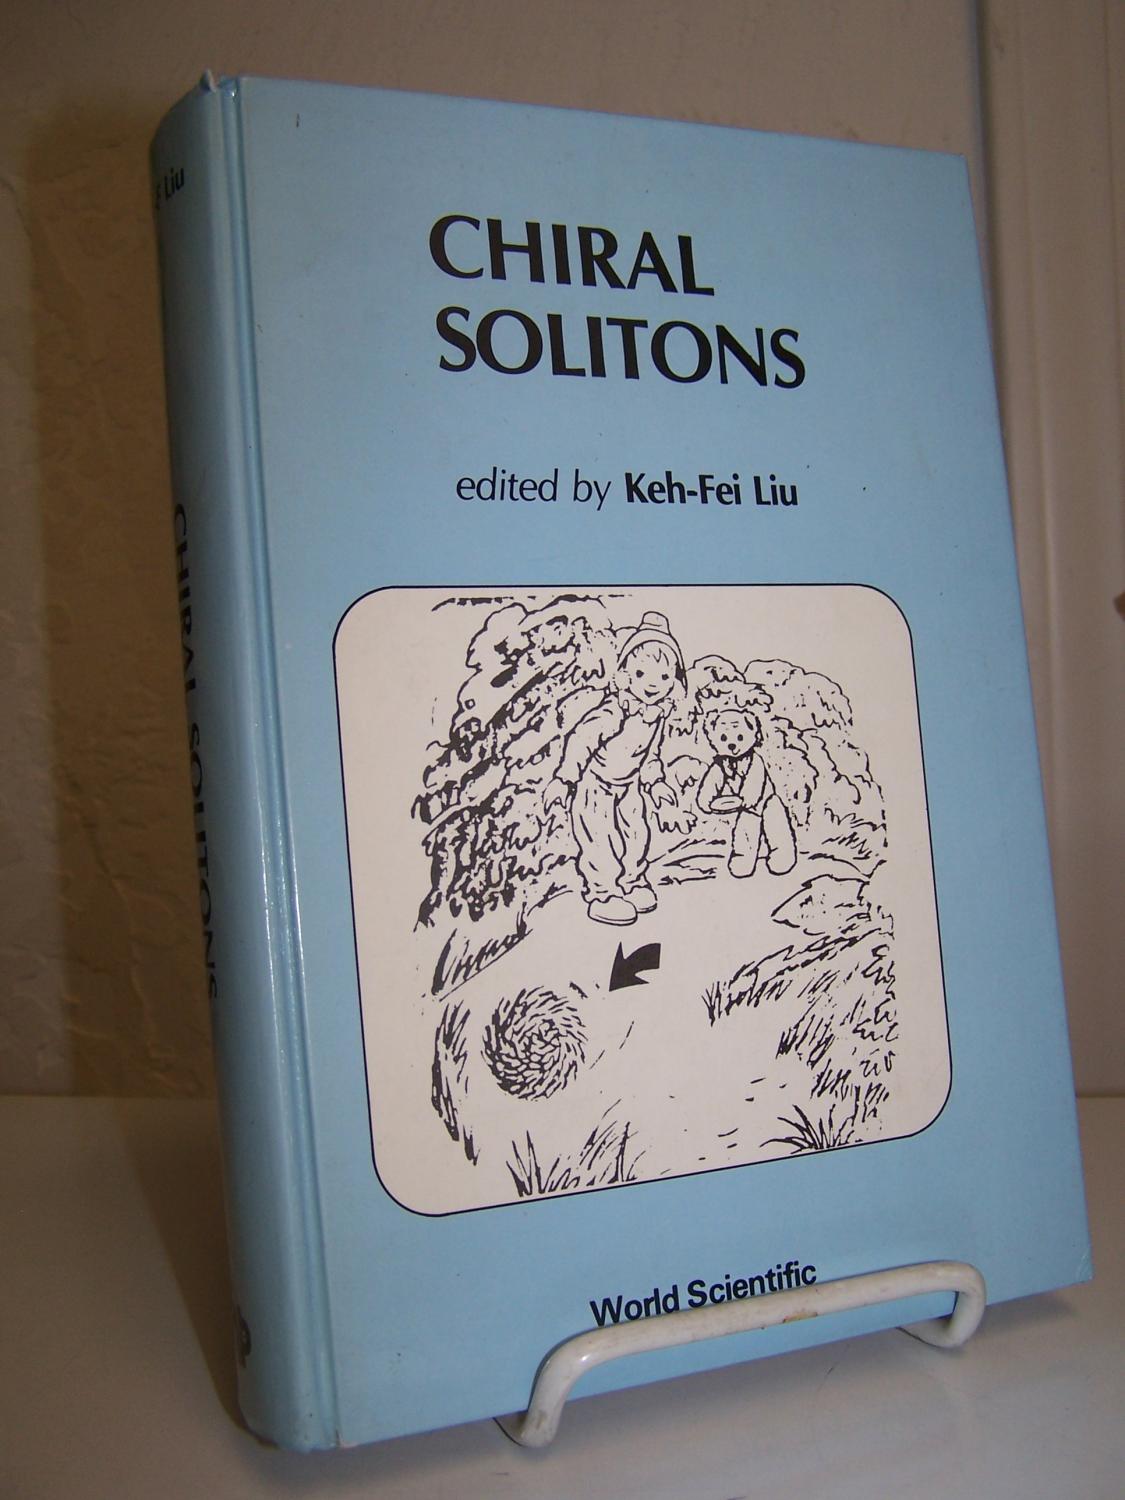 Chiral Solitons: A Review Volume